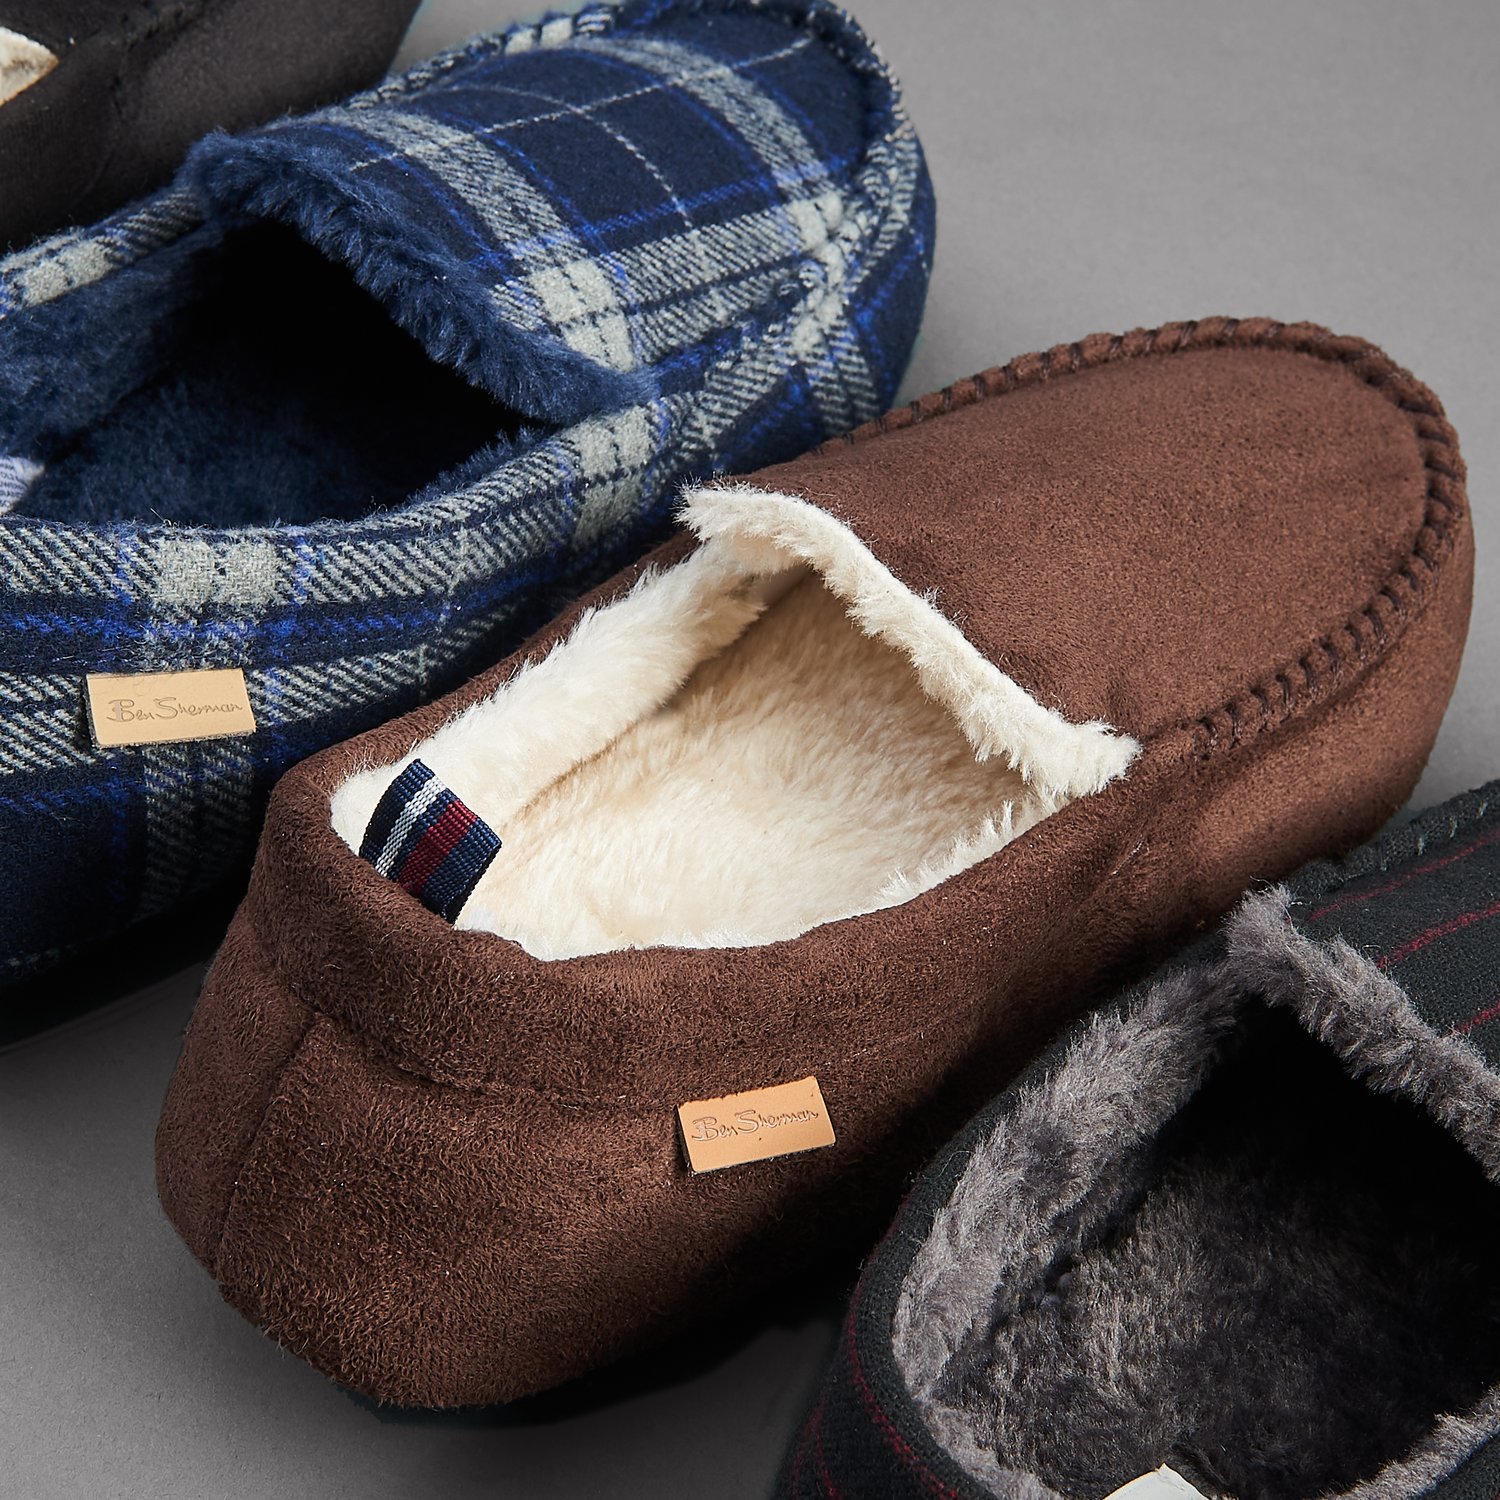 COLD WEATHER GIFTS - featuring slippers, robes, coats, sweaters